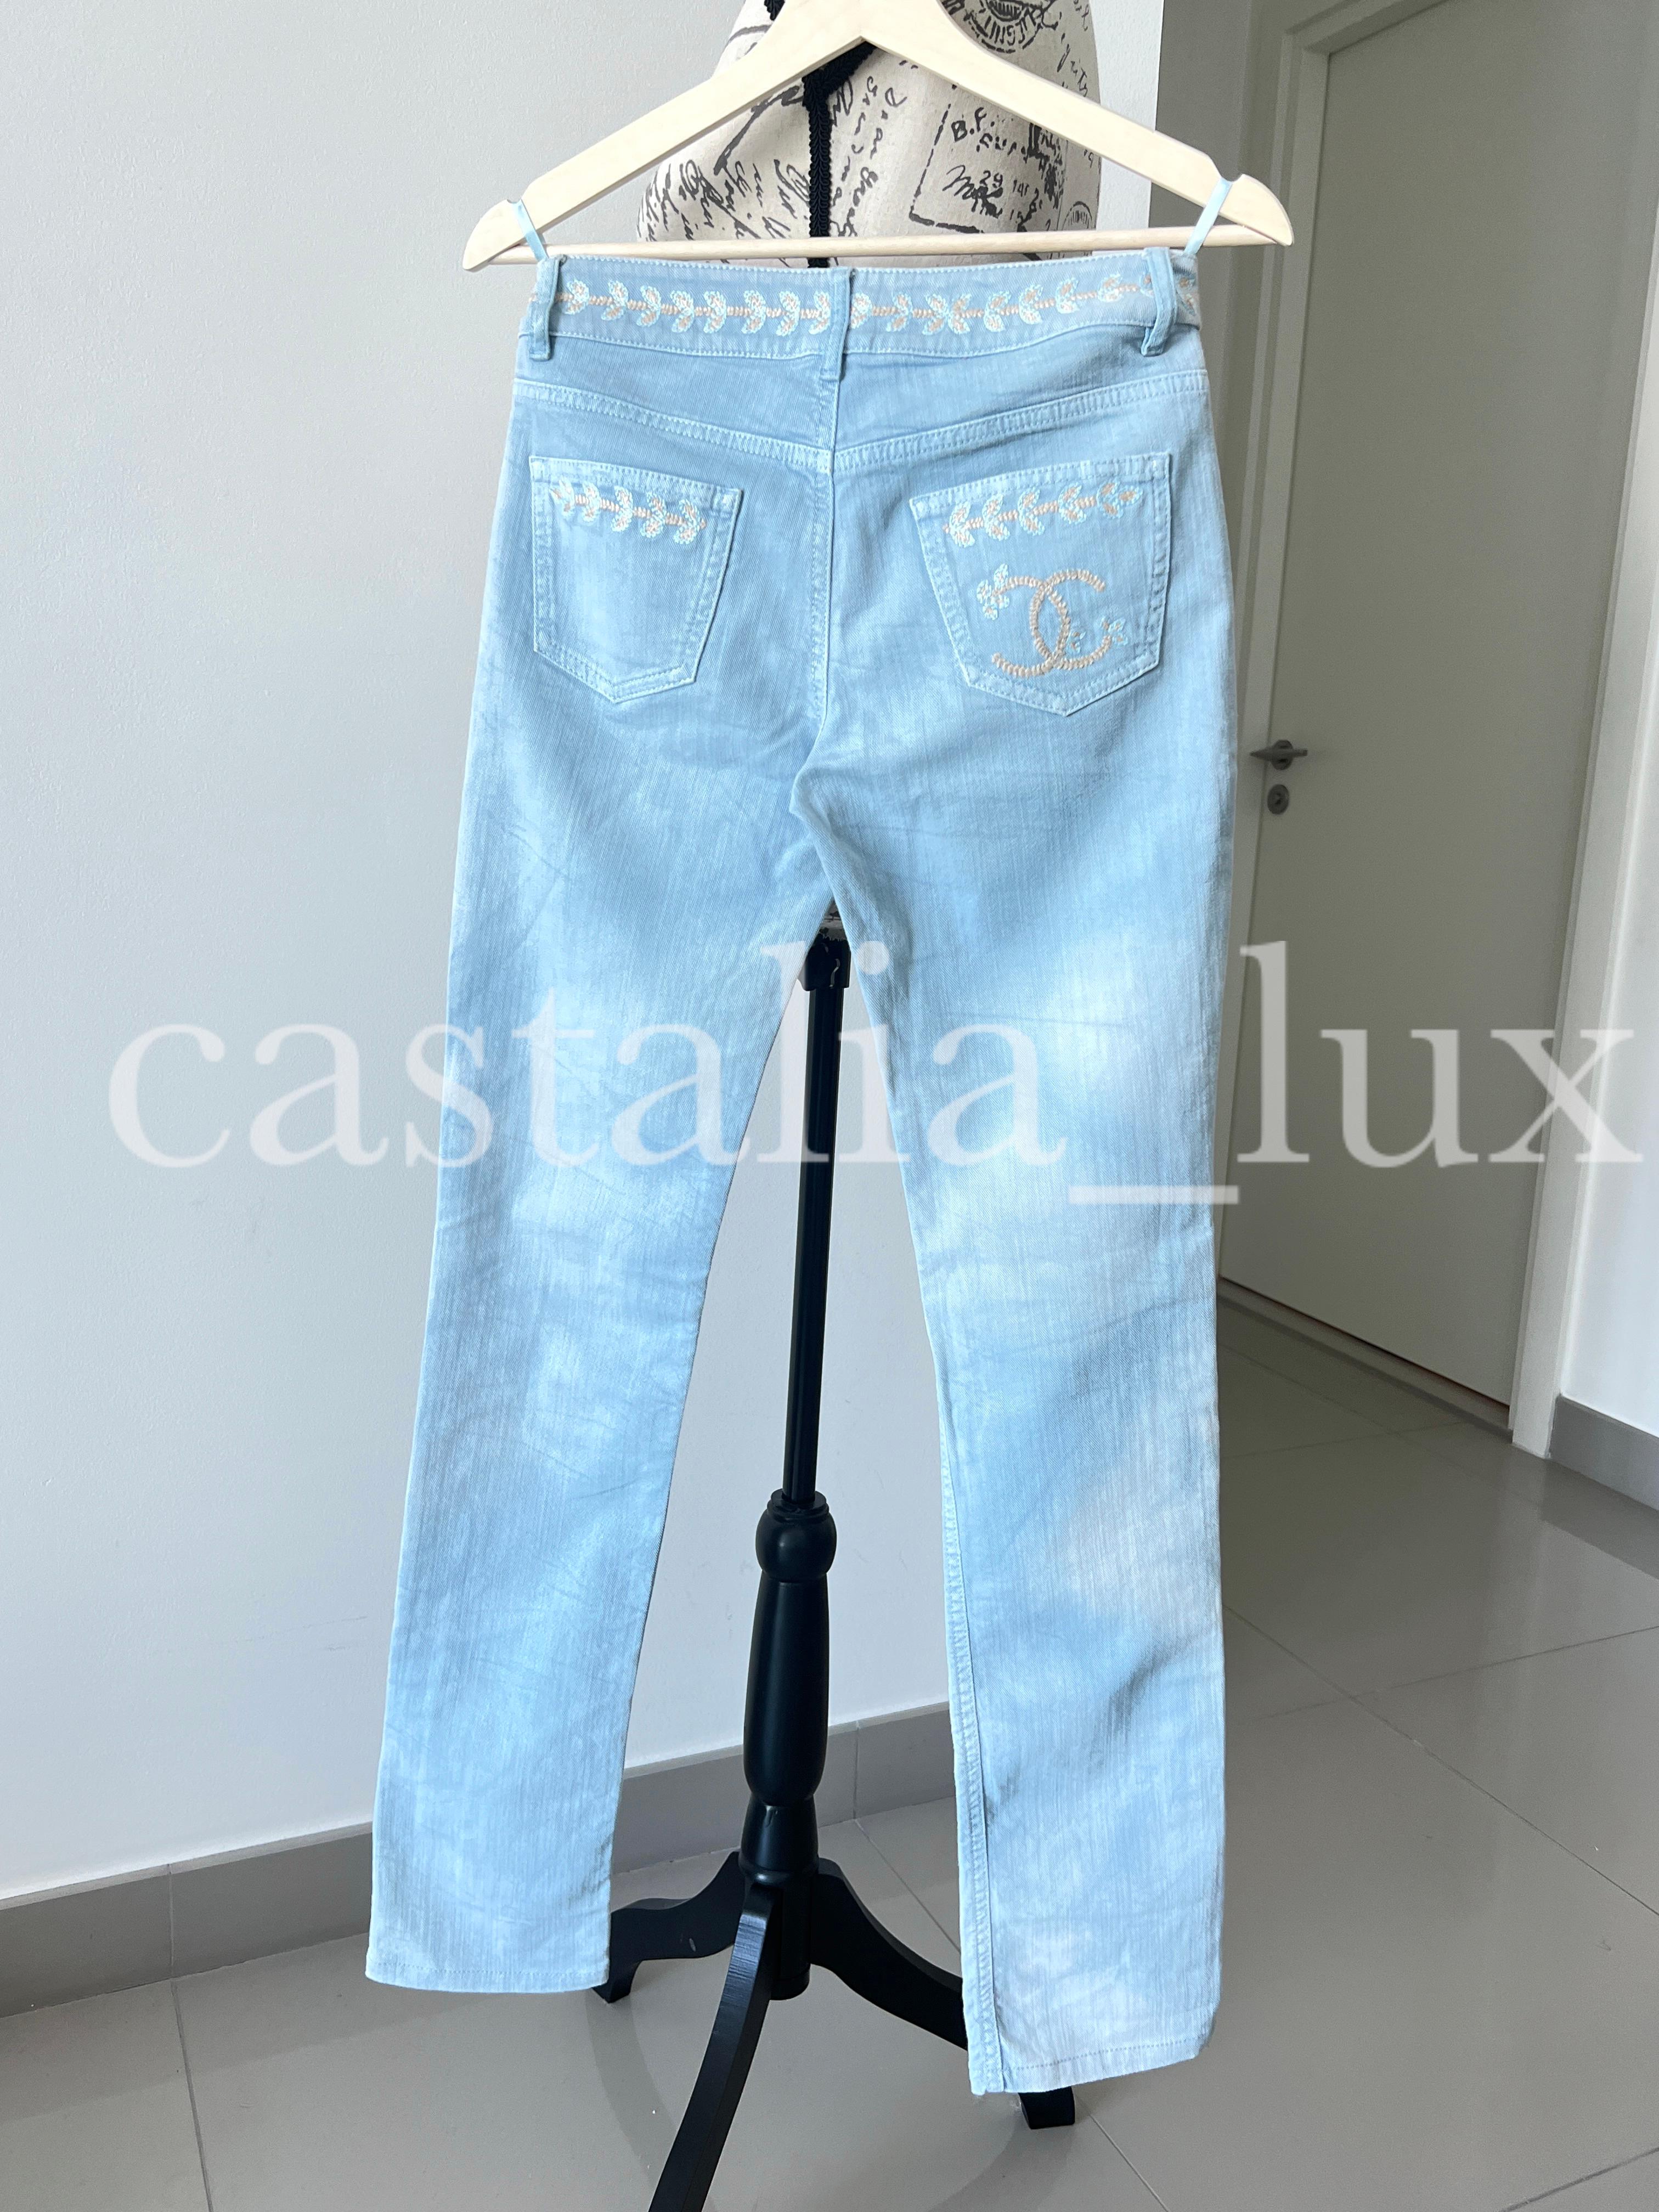 Chanel New CC Logo La Riviera Collection Runway Jeans For Sale 3